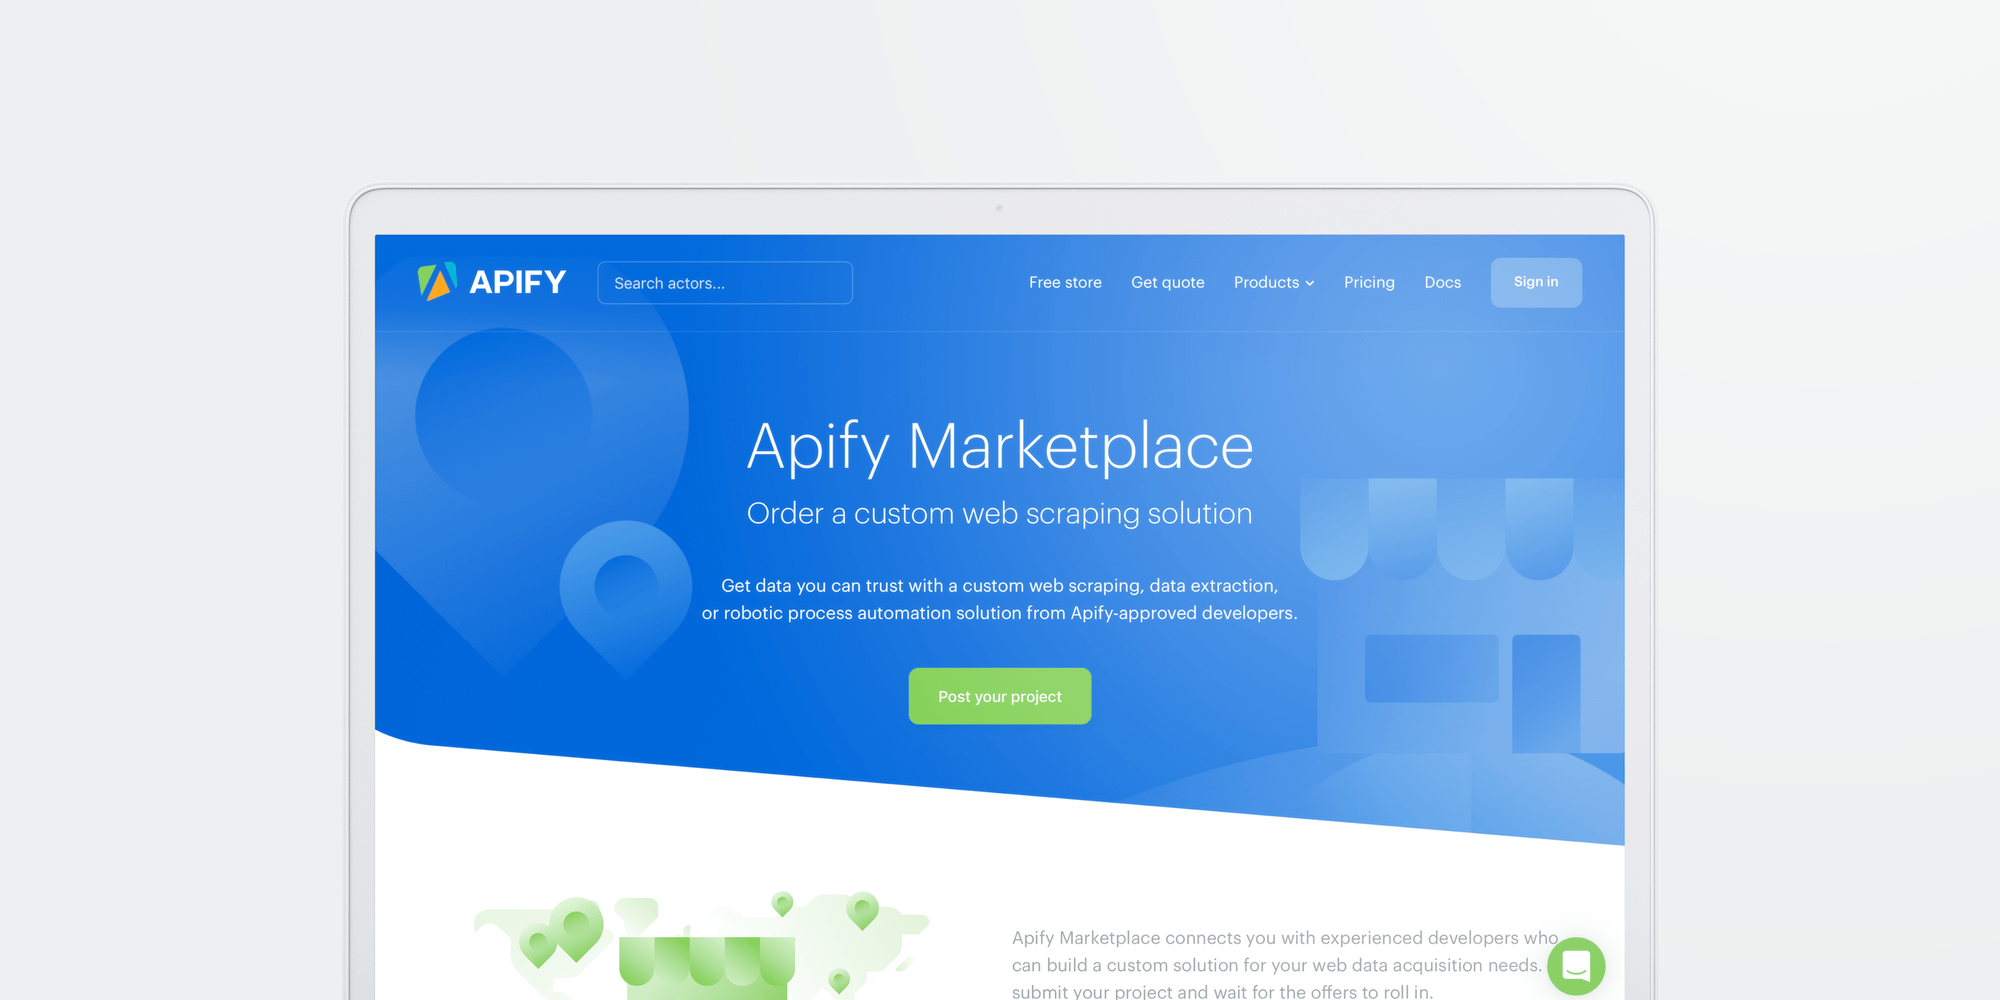 Apify Marketplace Order a custom web scraping solution.